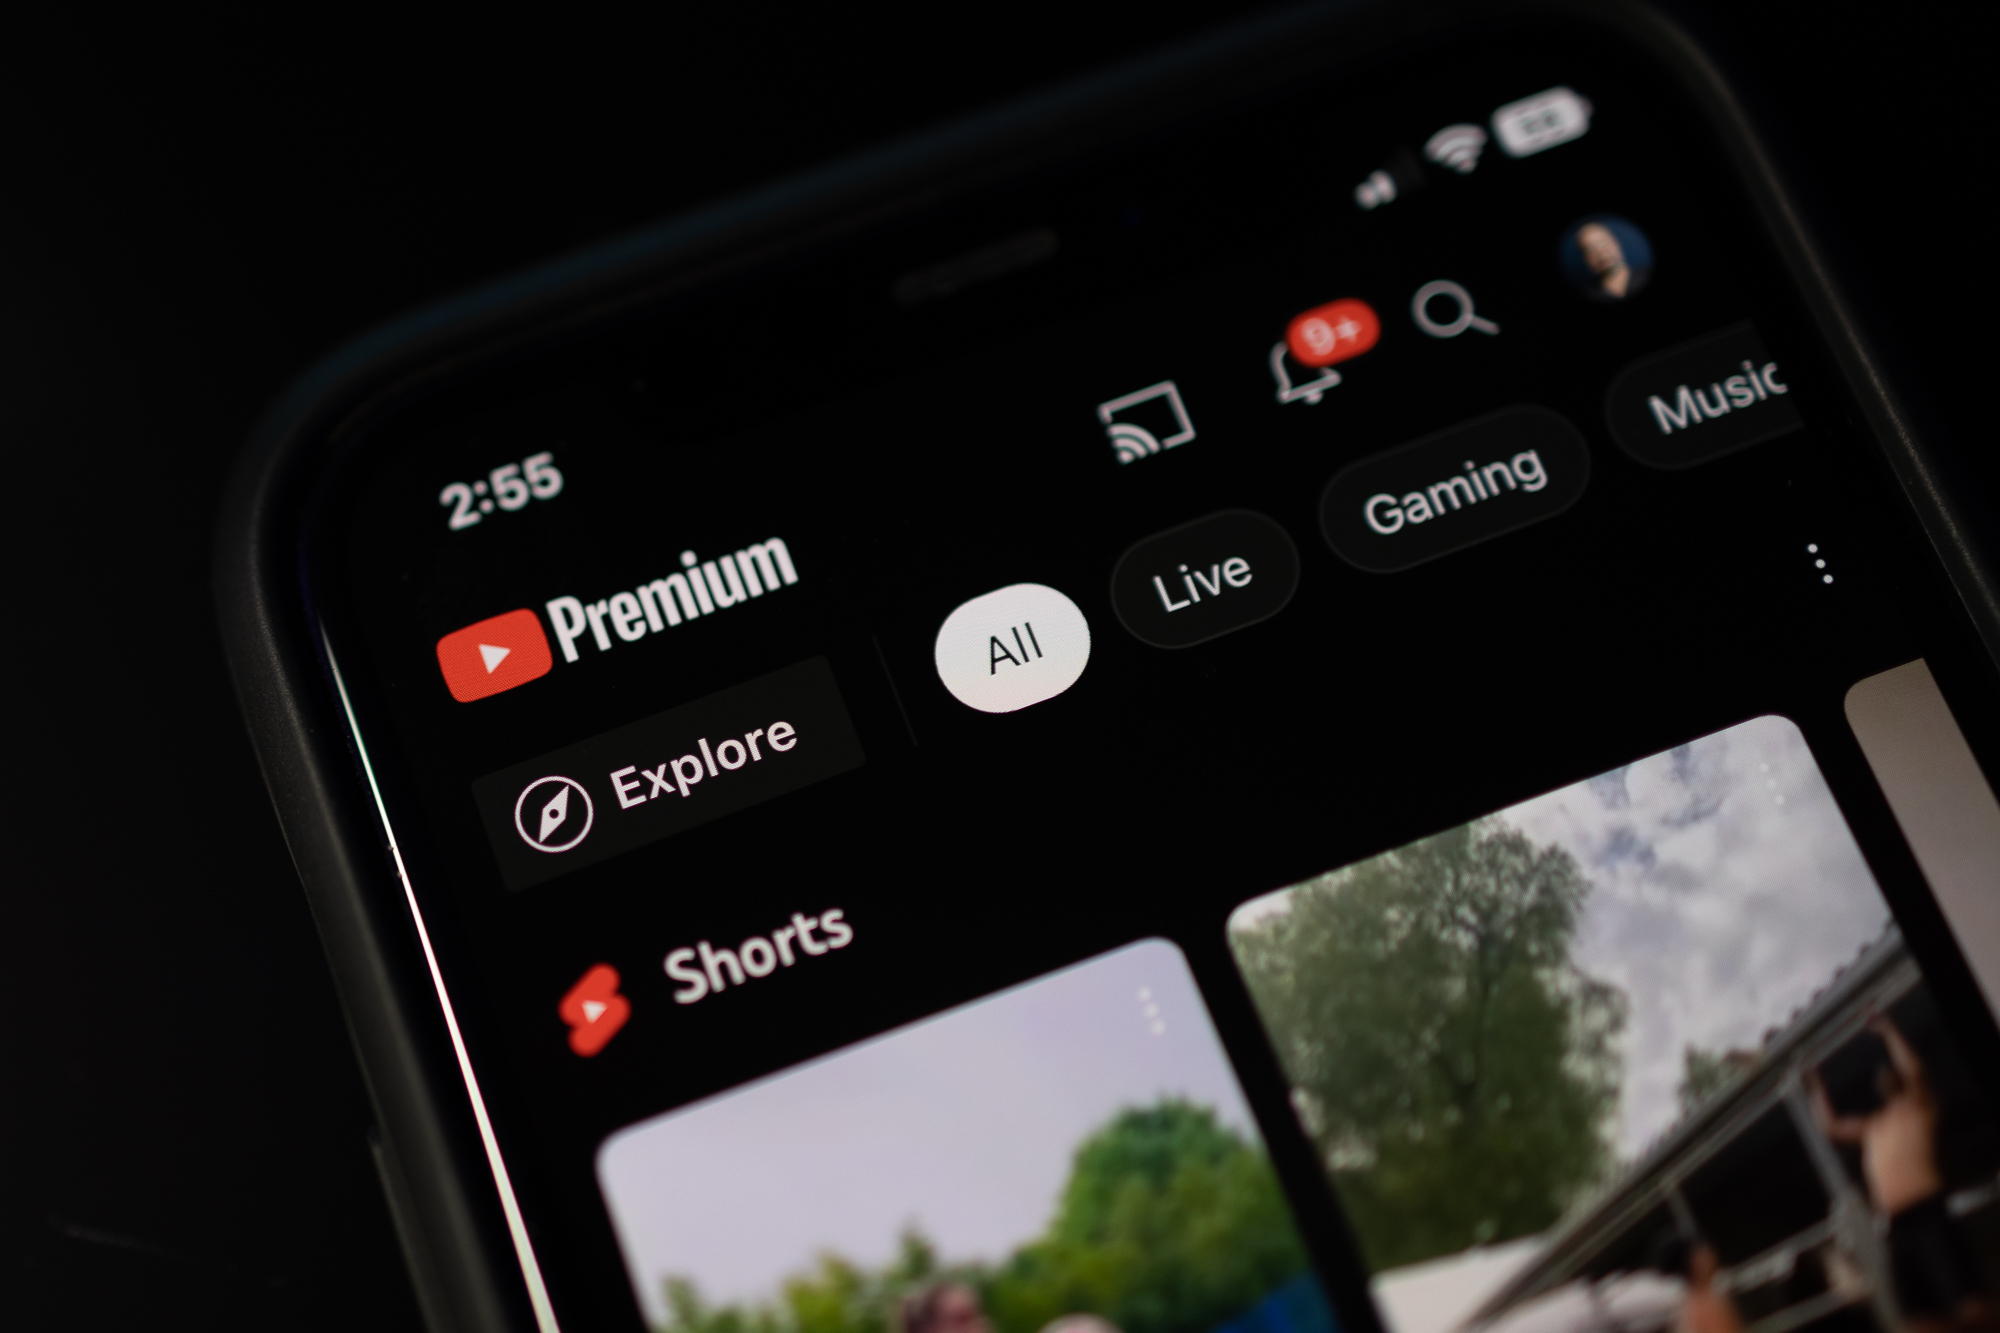 How to play YouTube in the background on iPhone and
Android